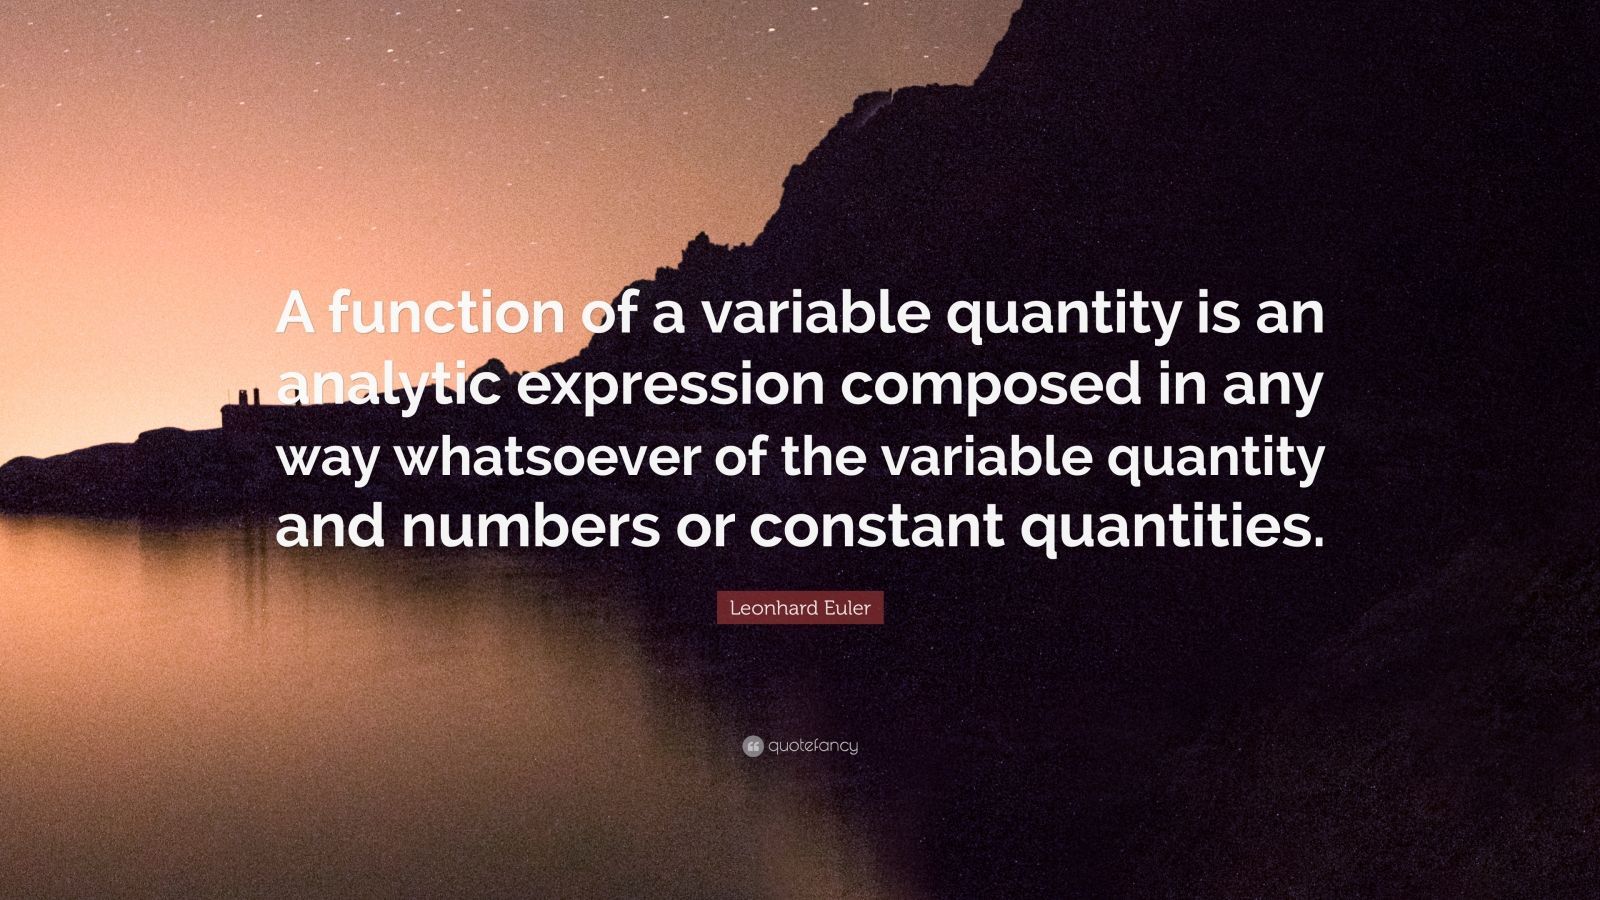 Leonhard Euler Quote: “A function of a variable quantity is an analytic expression composed in any way whatsoever of the variable quantity and .” (7 wallpaper)